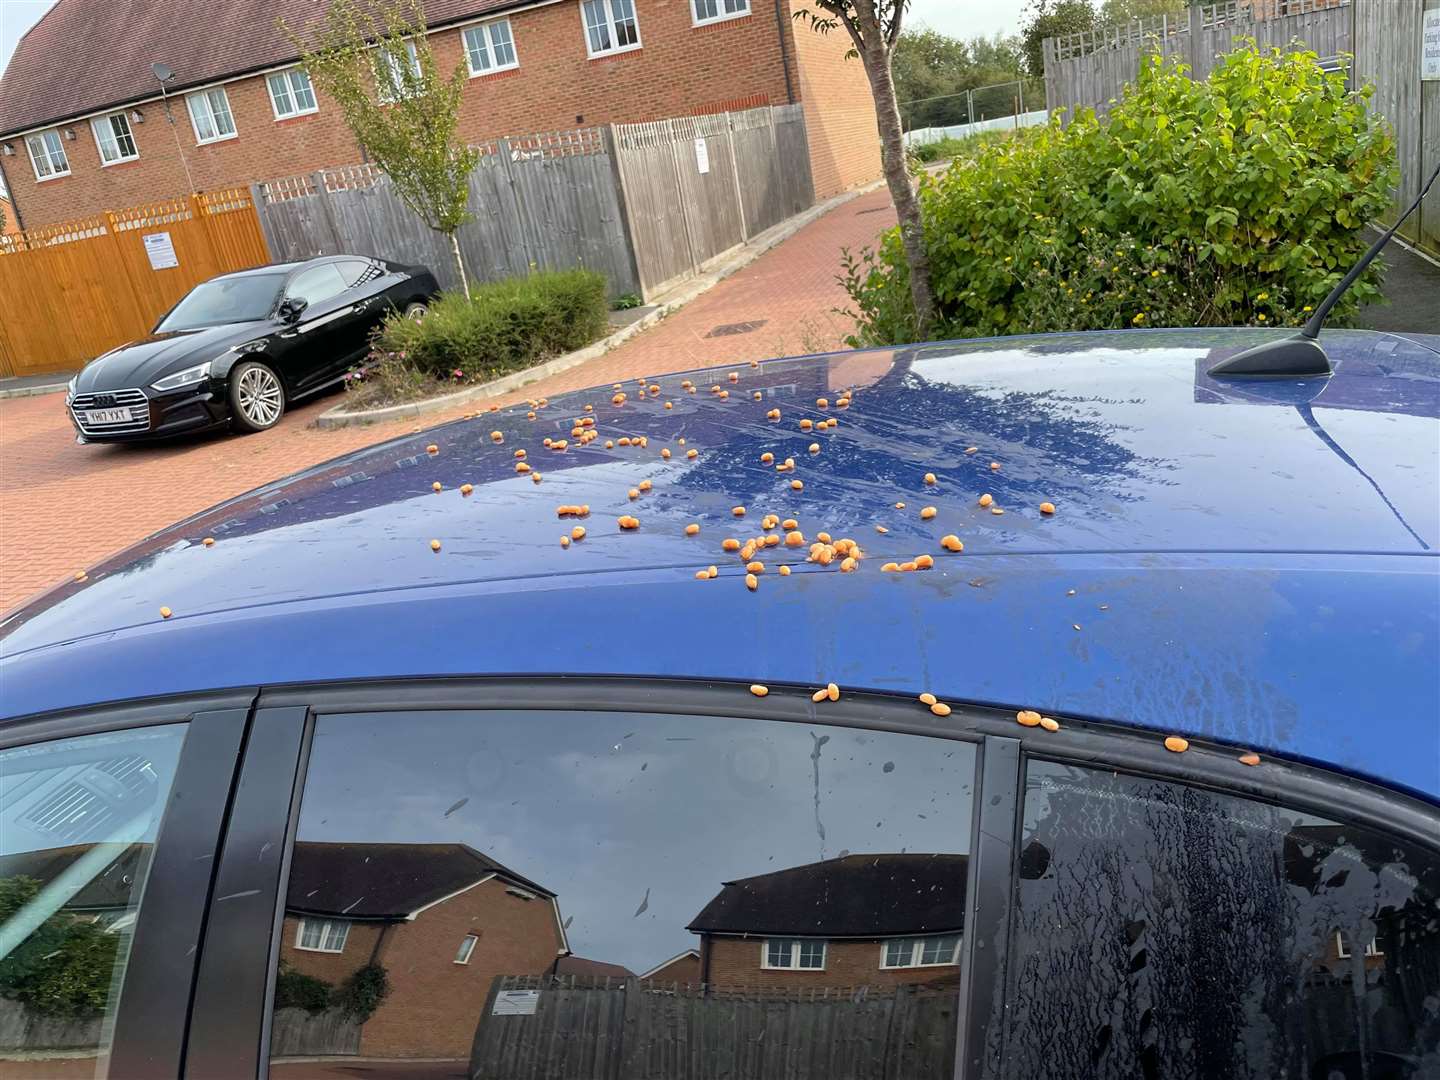 Beans were also thrown over cars in the road